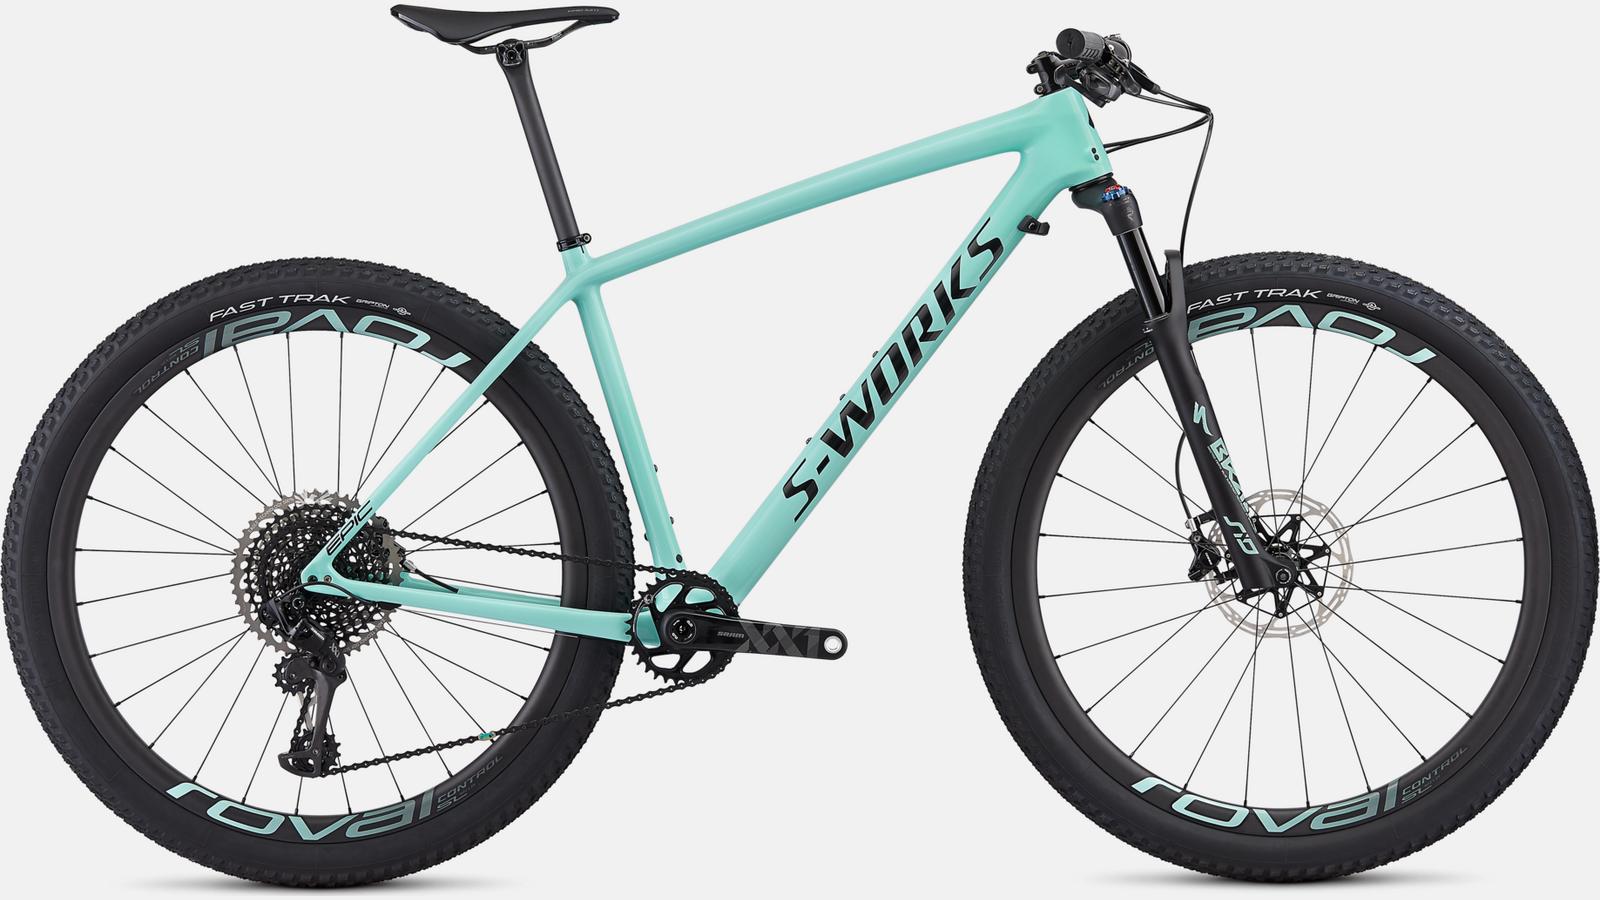 Paint for 2019 Specialized S-Works Epic Hardtail - Gloss Mint